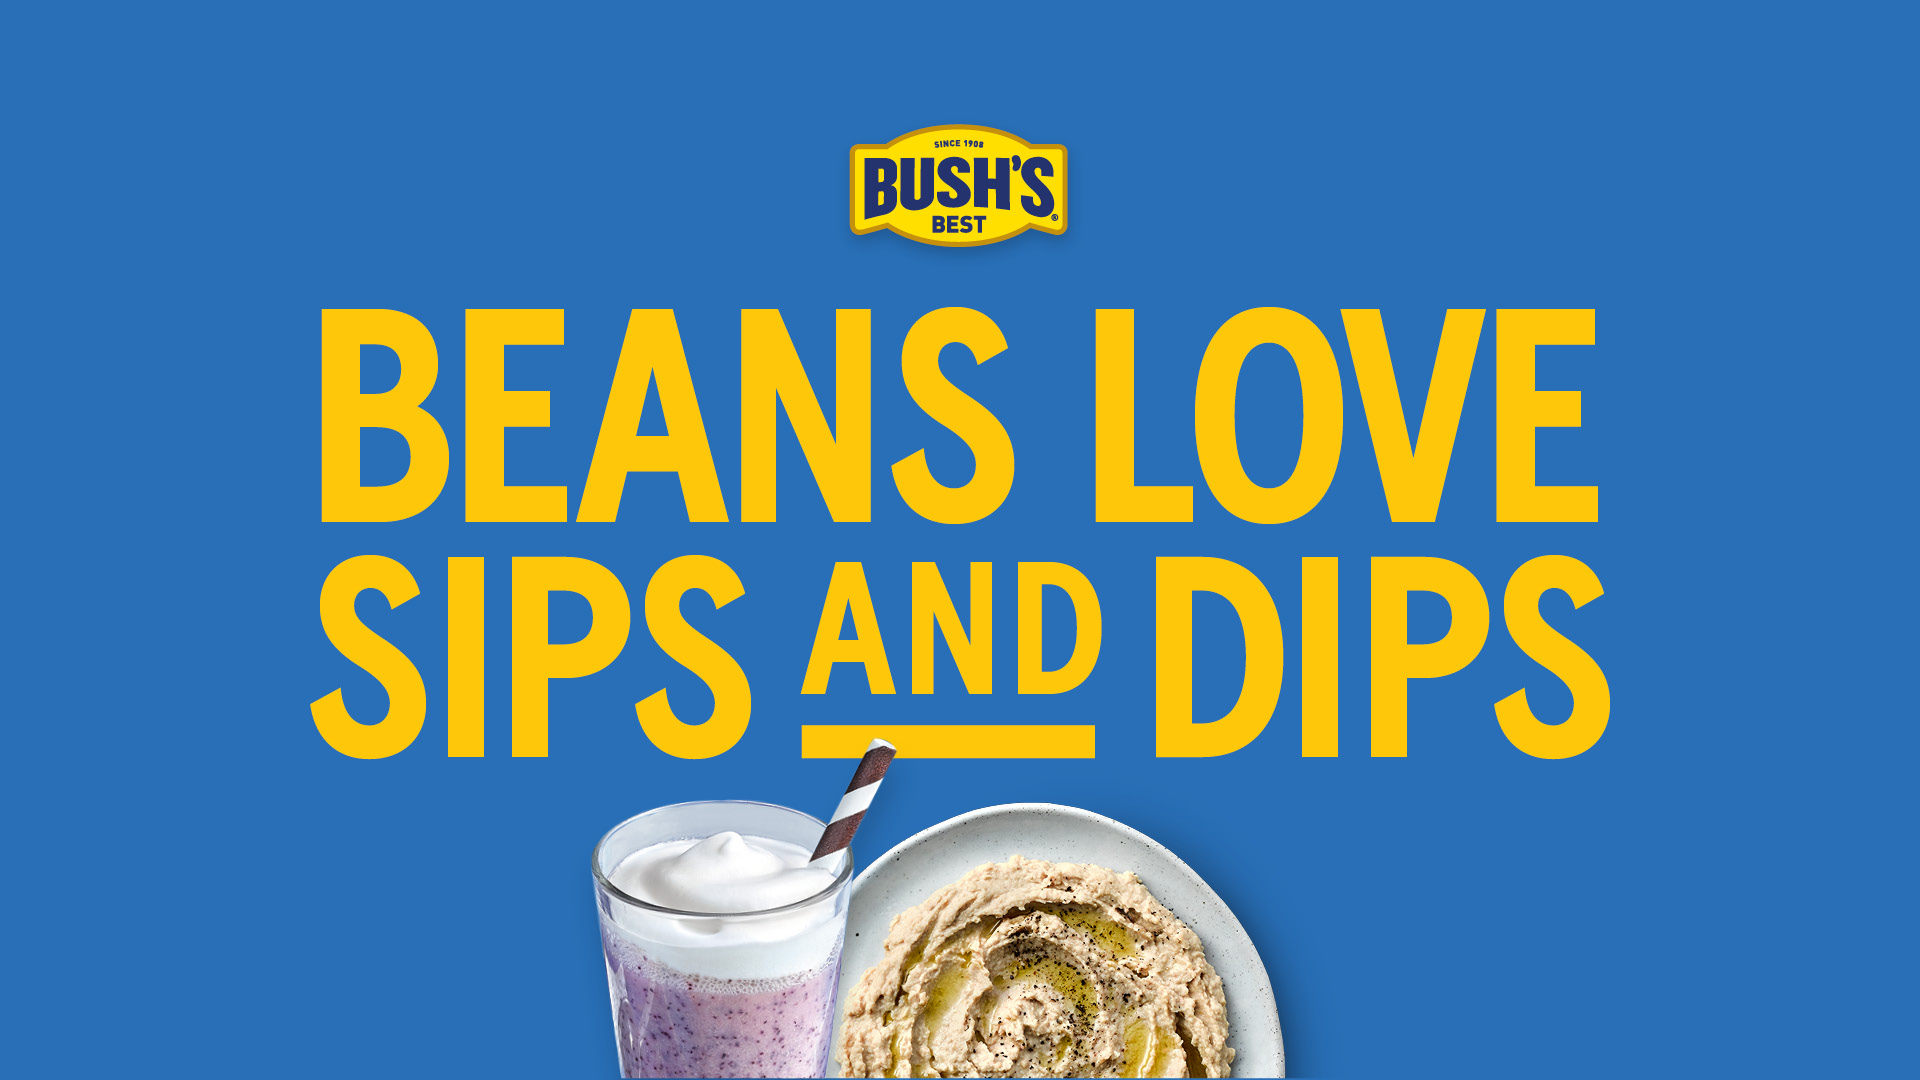 Blue background with yellow text that says "Beans love sips and dips." An image of a smoothie and a dip.